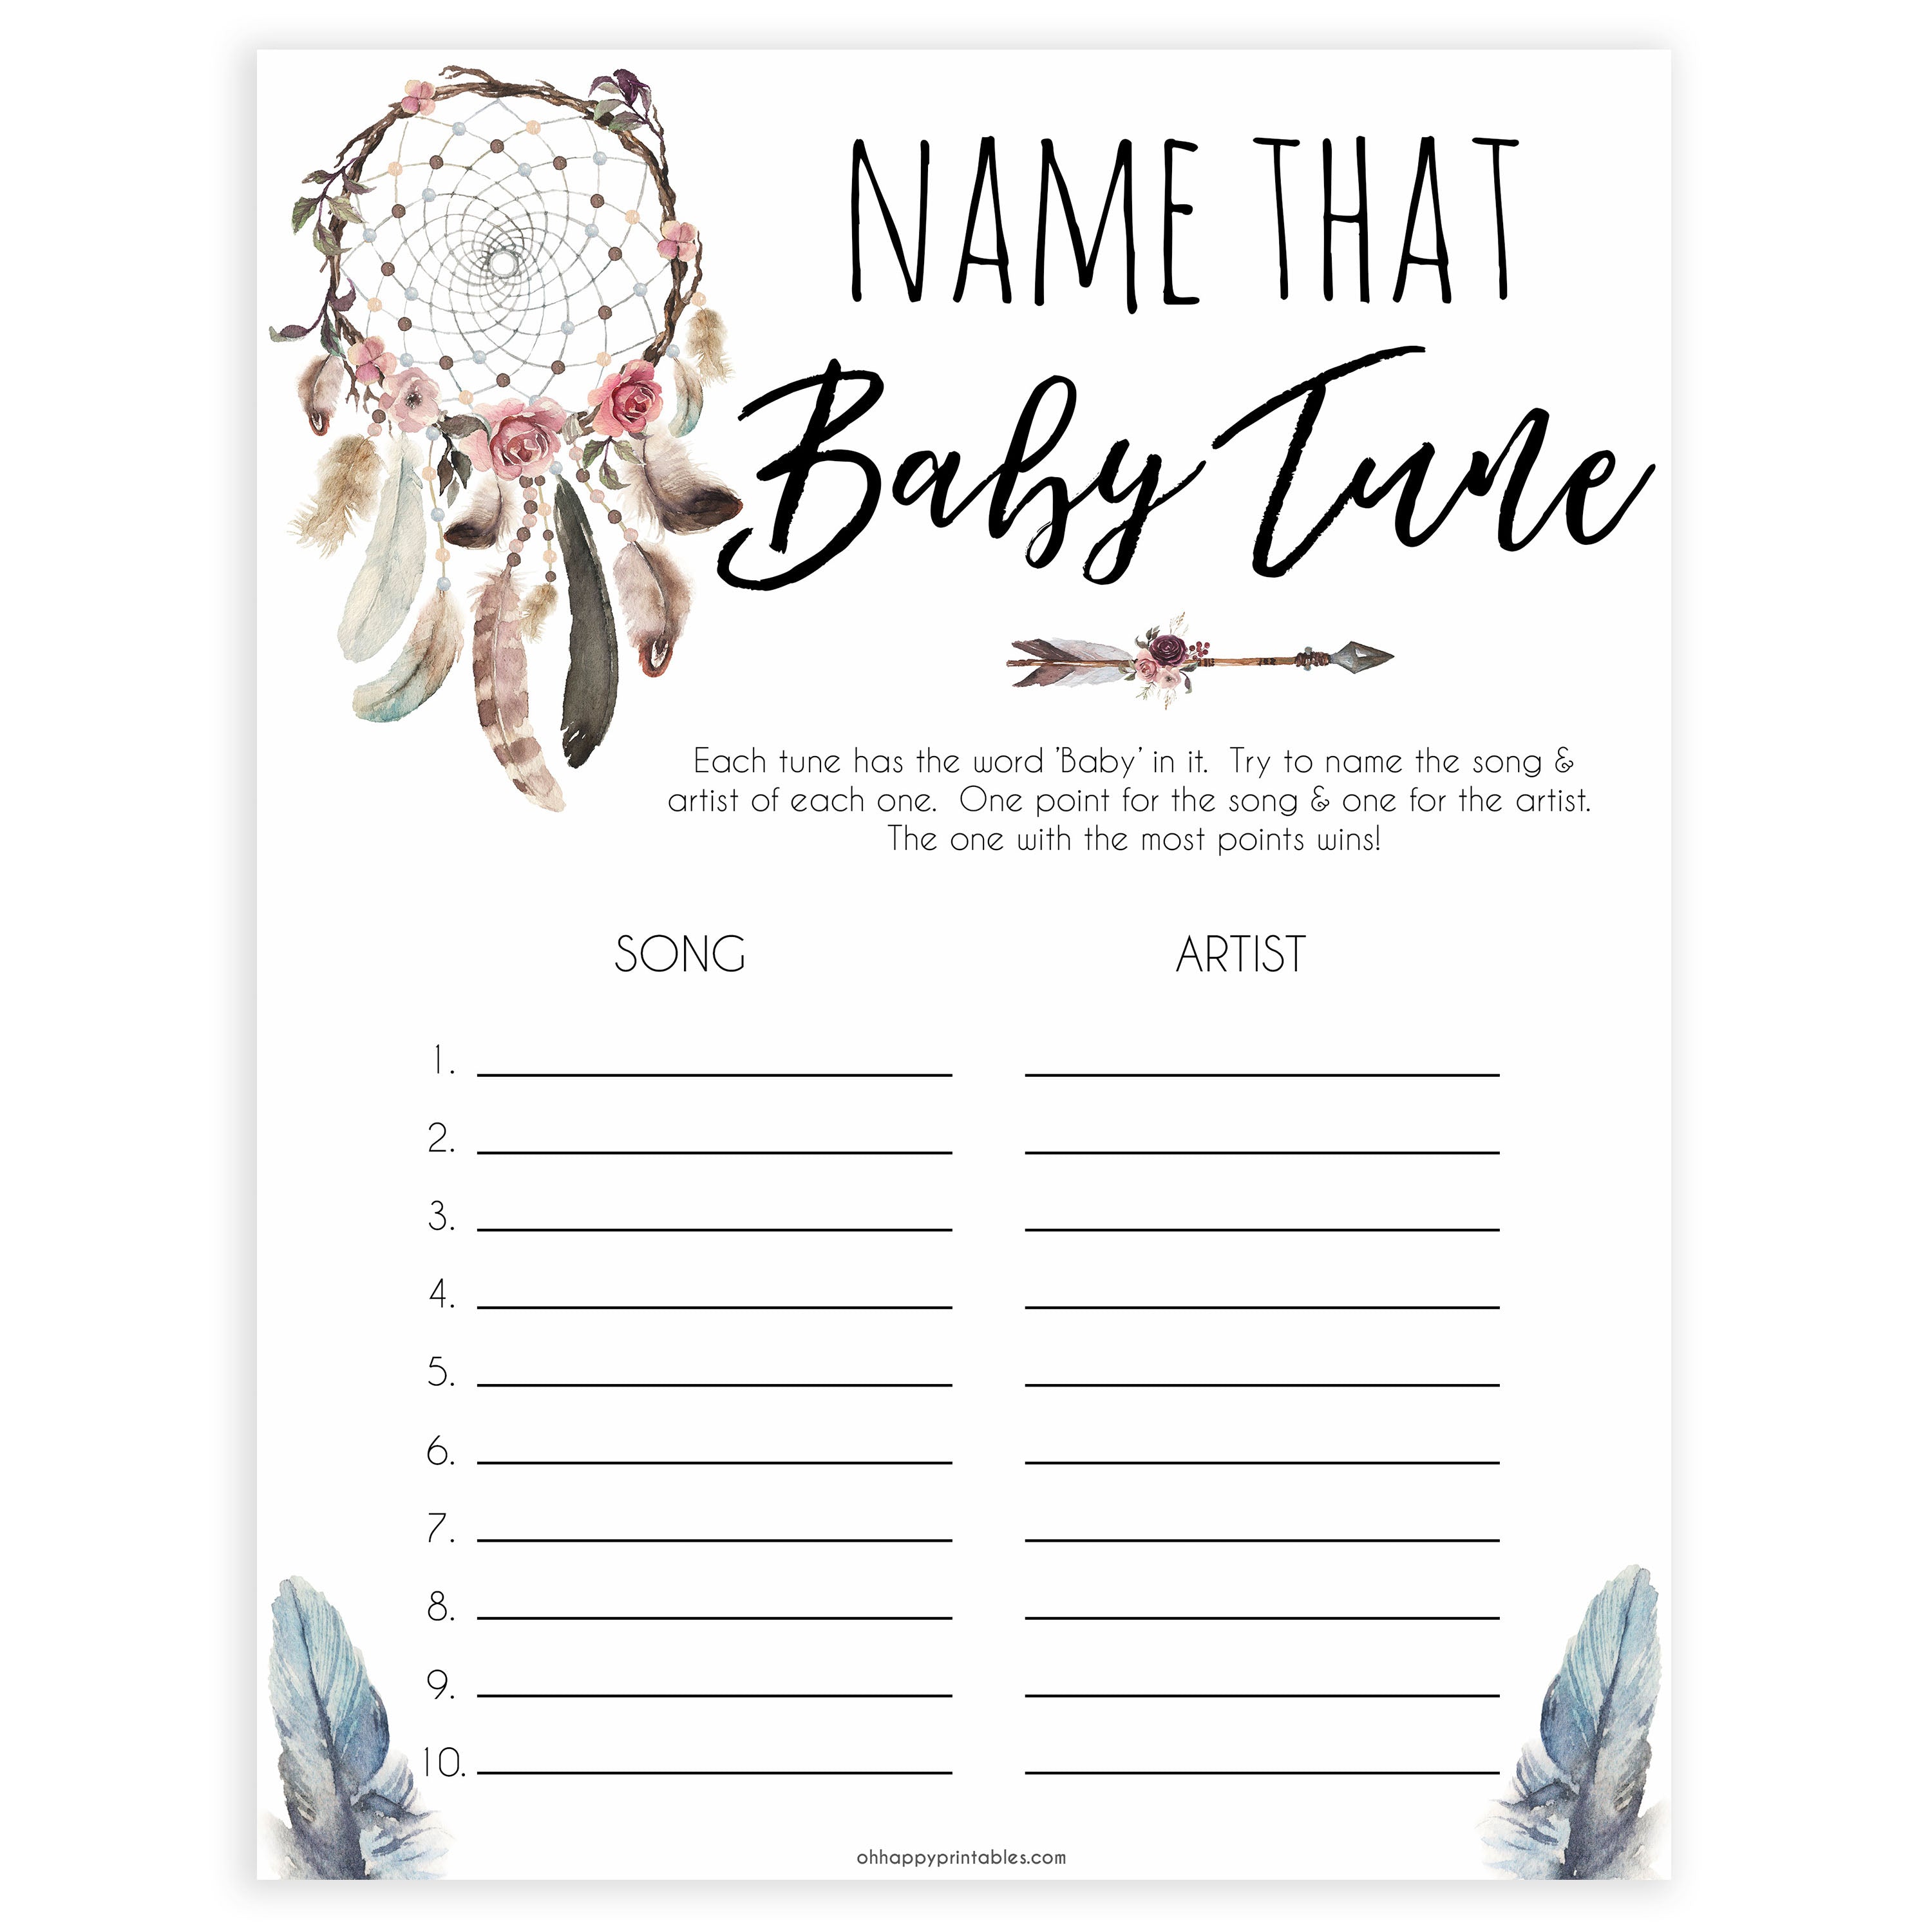 Boho baby games, name that baby tune baby game, fun baby games, printable baby games, top 10 baby games, boho baby shower, baby games, hilarious baby games